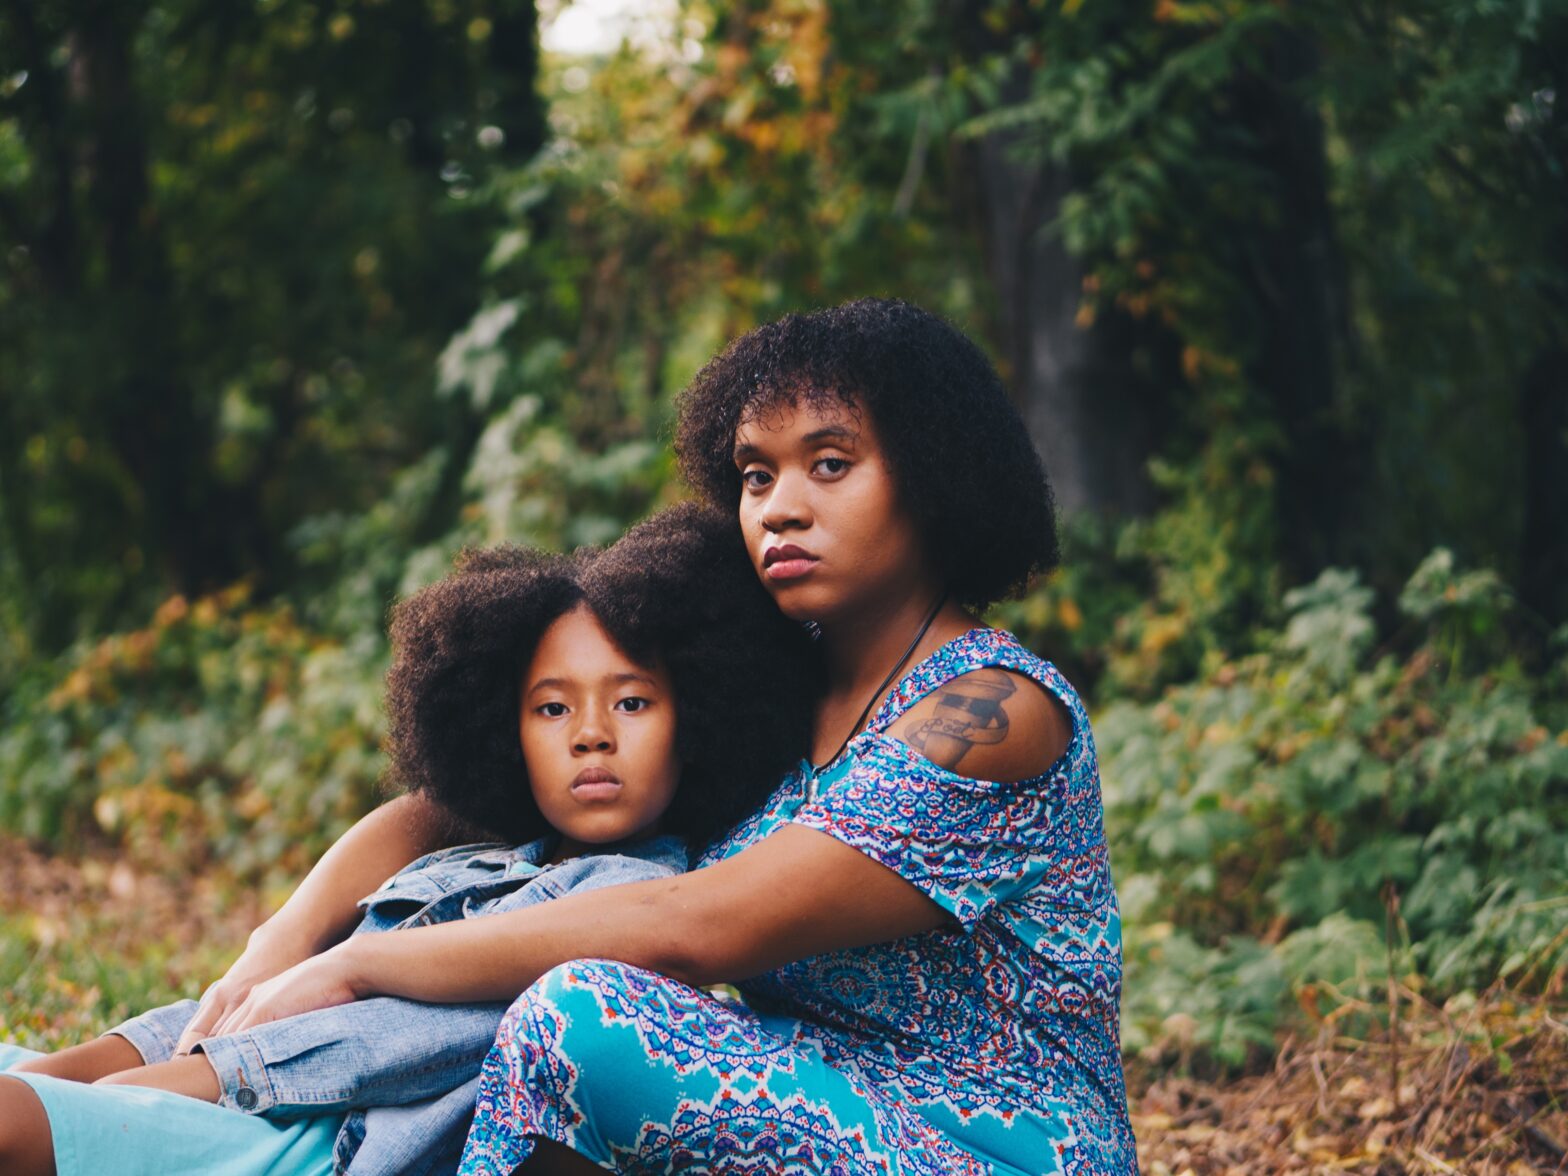 Here are some things narcissistic mothers say, and the best way to respond as healthily as possible. pictured: black mother and daugther hugging.